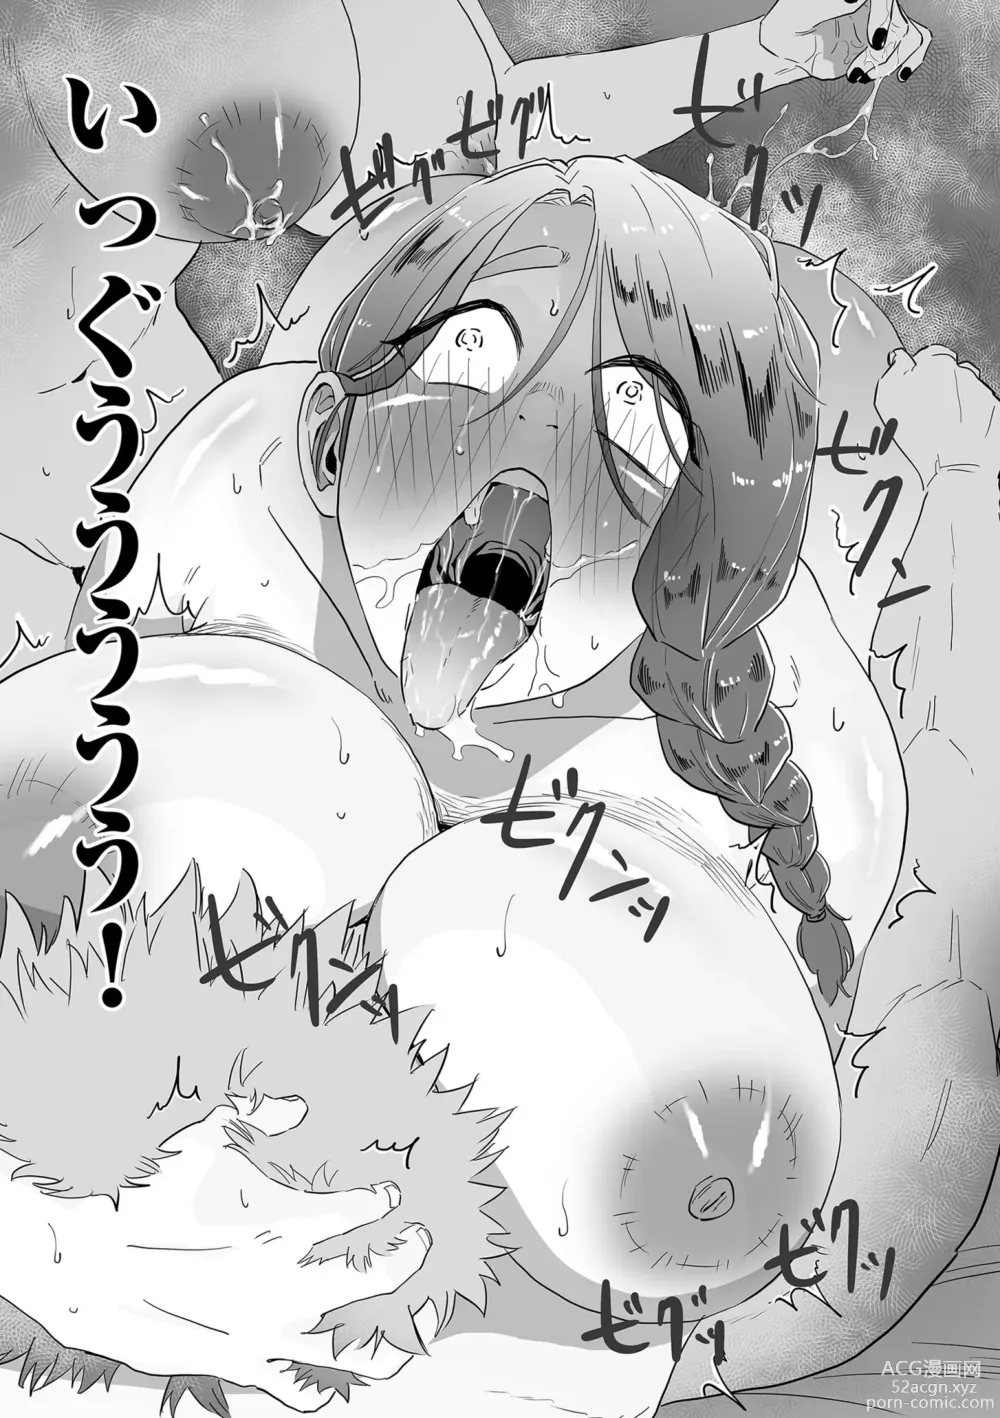 Page 191 of manga Mesu Dorei Sengen - A chain of nightmares, Six heroines become ME DOREI in front of a big, strong cxxk...?